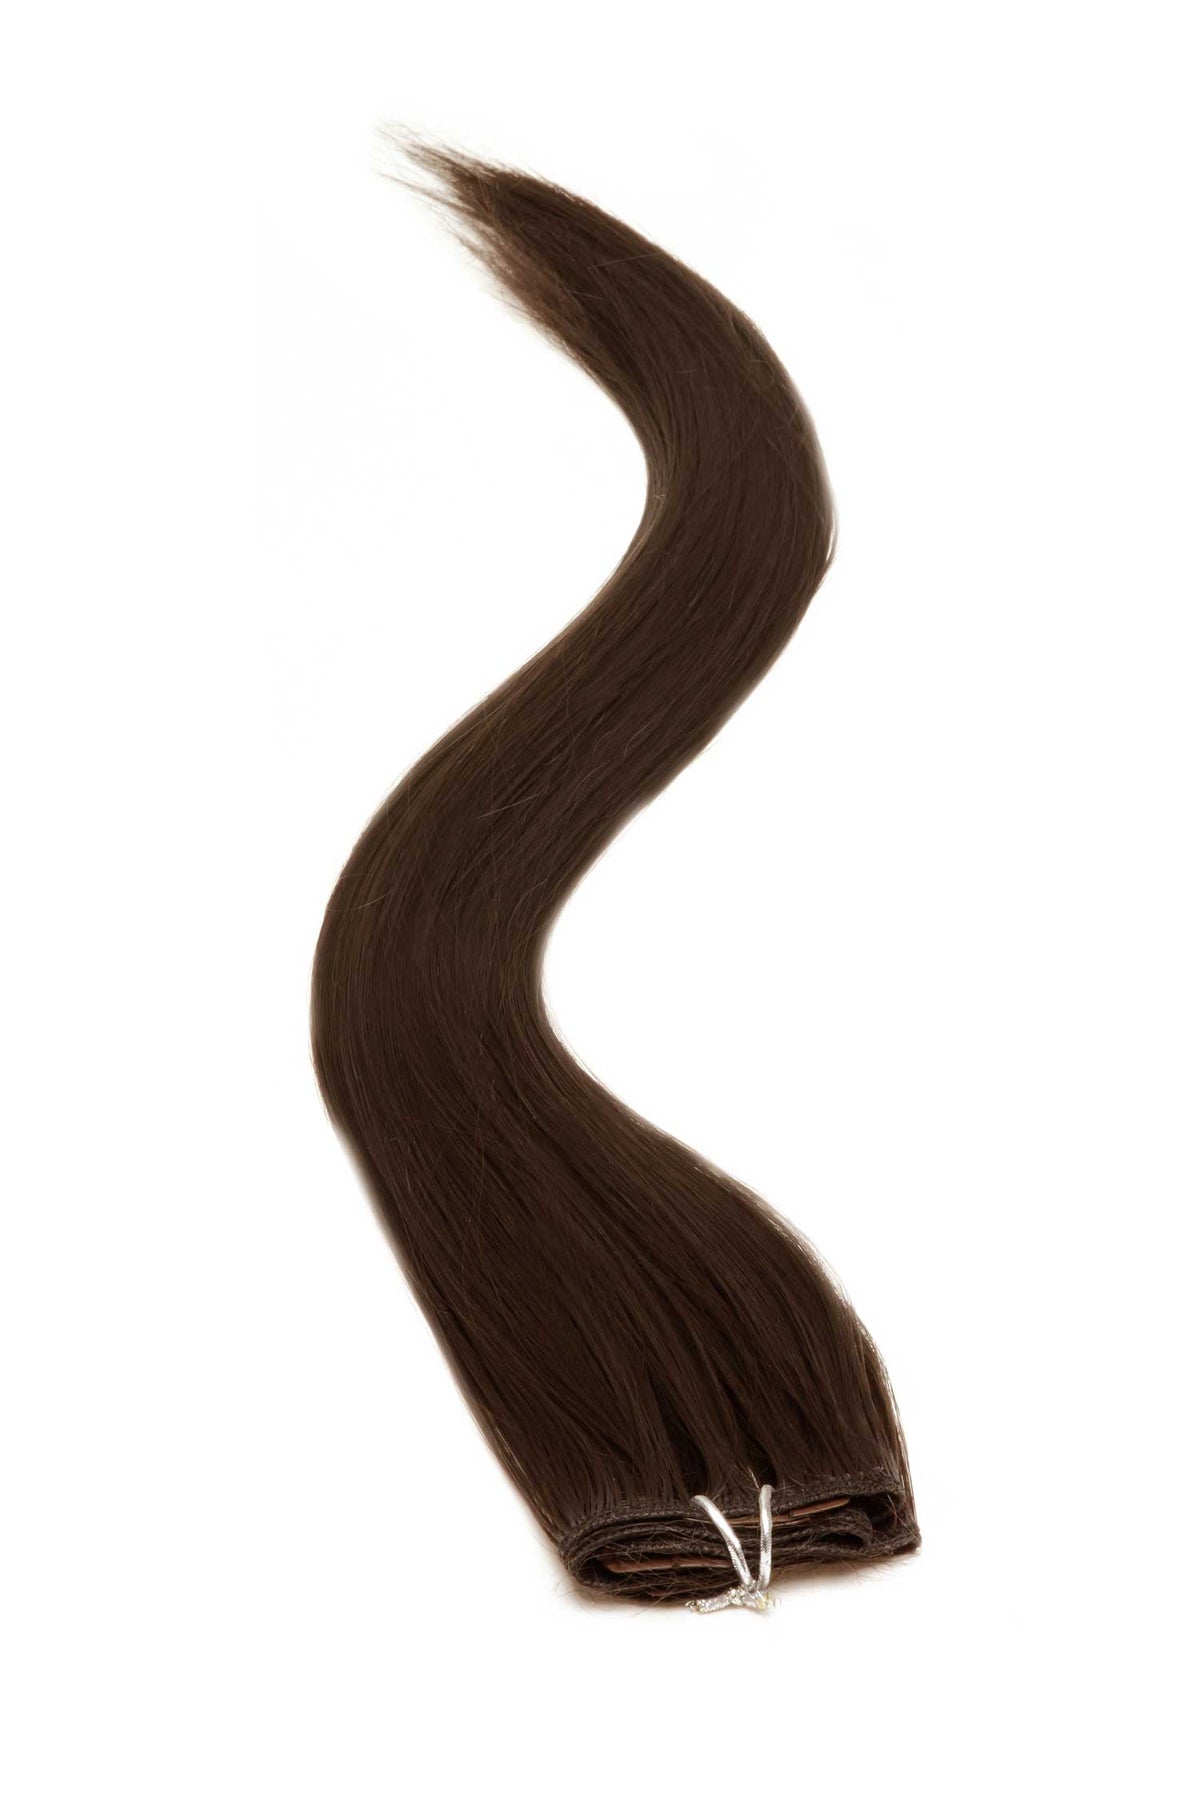 Synthetic Clip In Hair Extensions | 18 Inch Brown Col:2 - beautyhair.co.ukHair Extensions